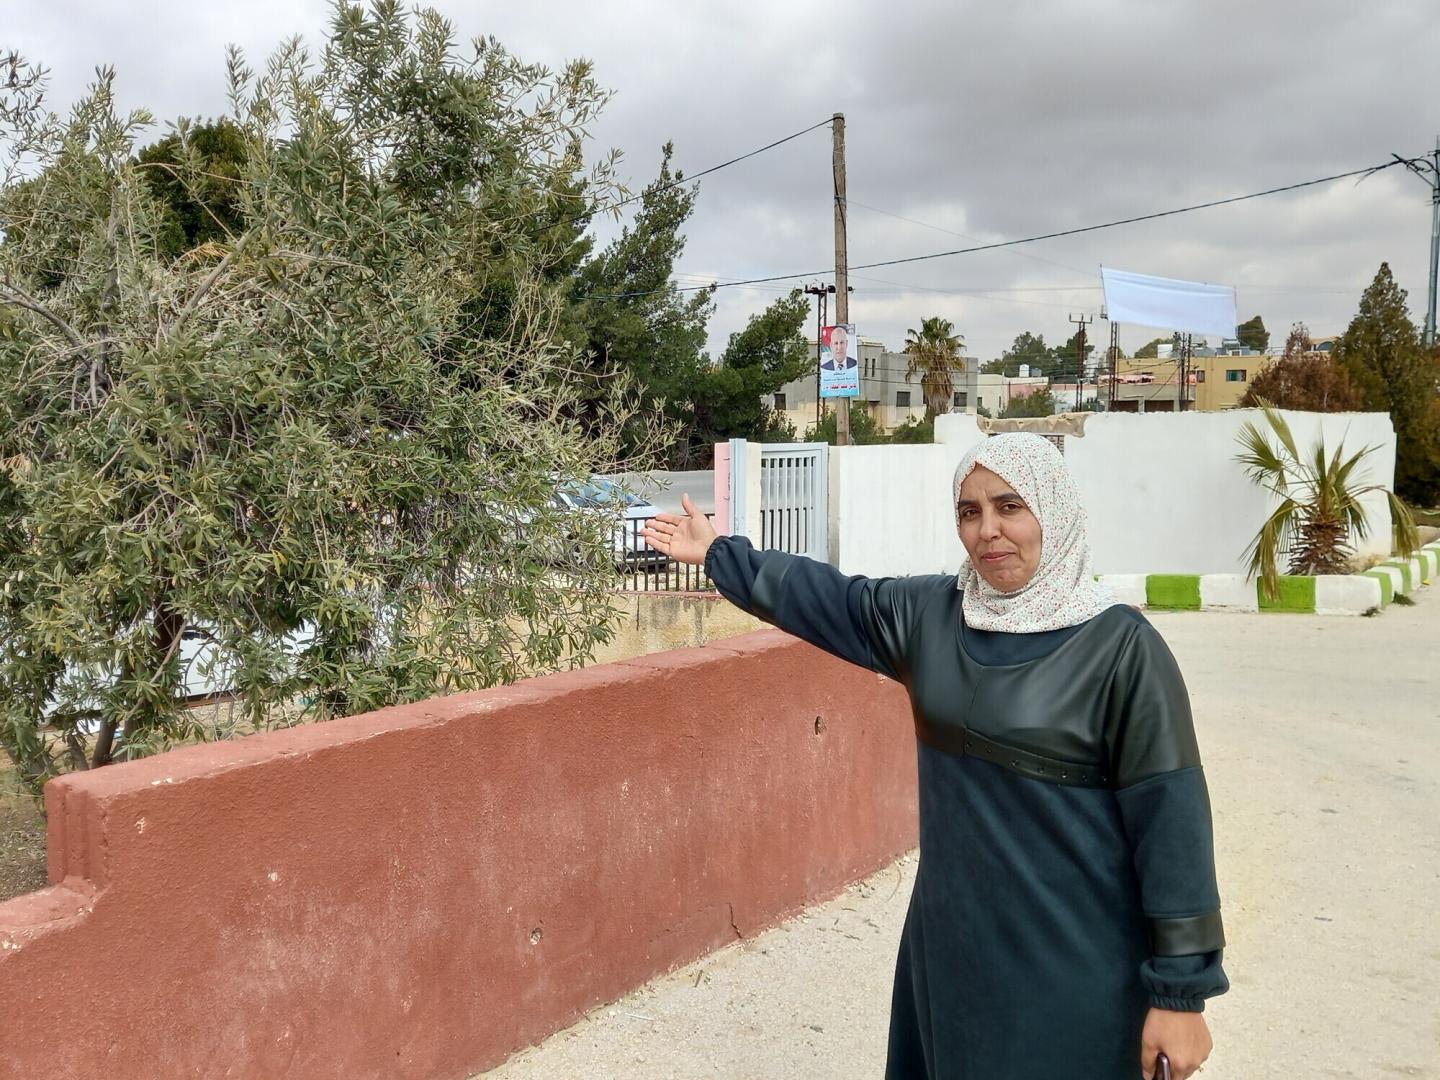 A Jordanian woman in a hijab gestures towards a tree on the left.